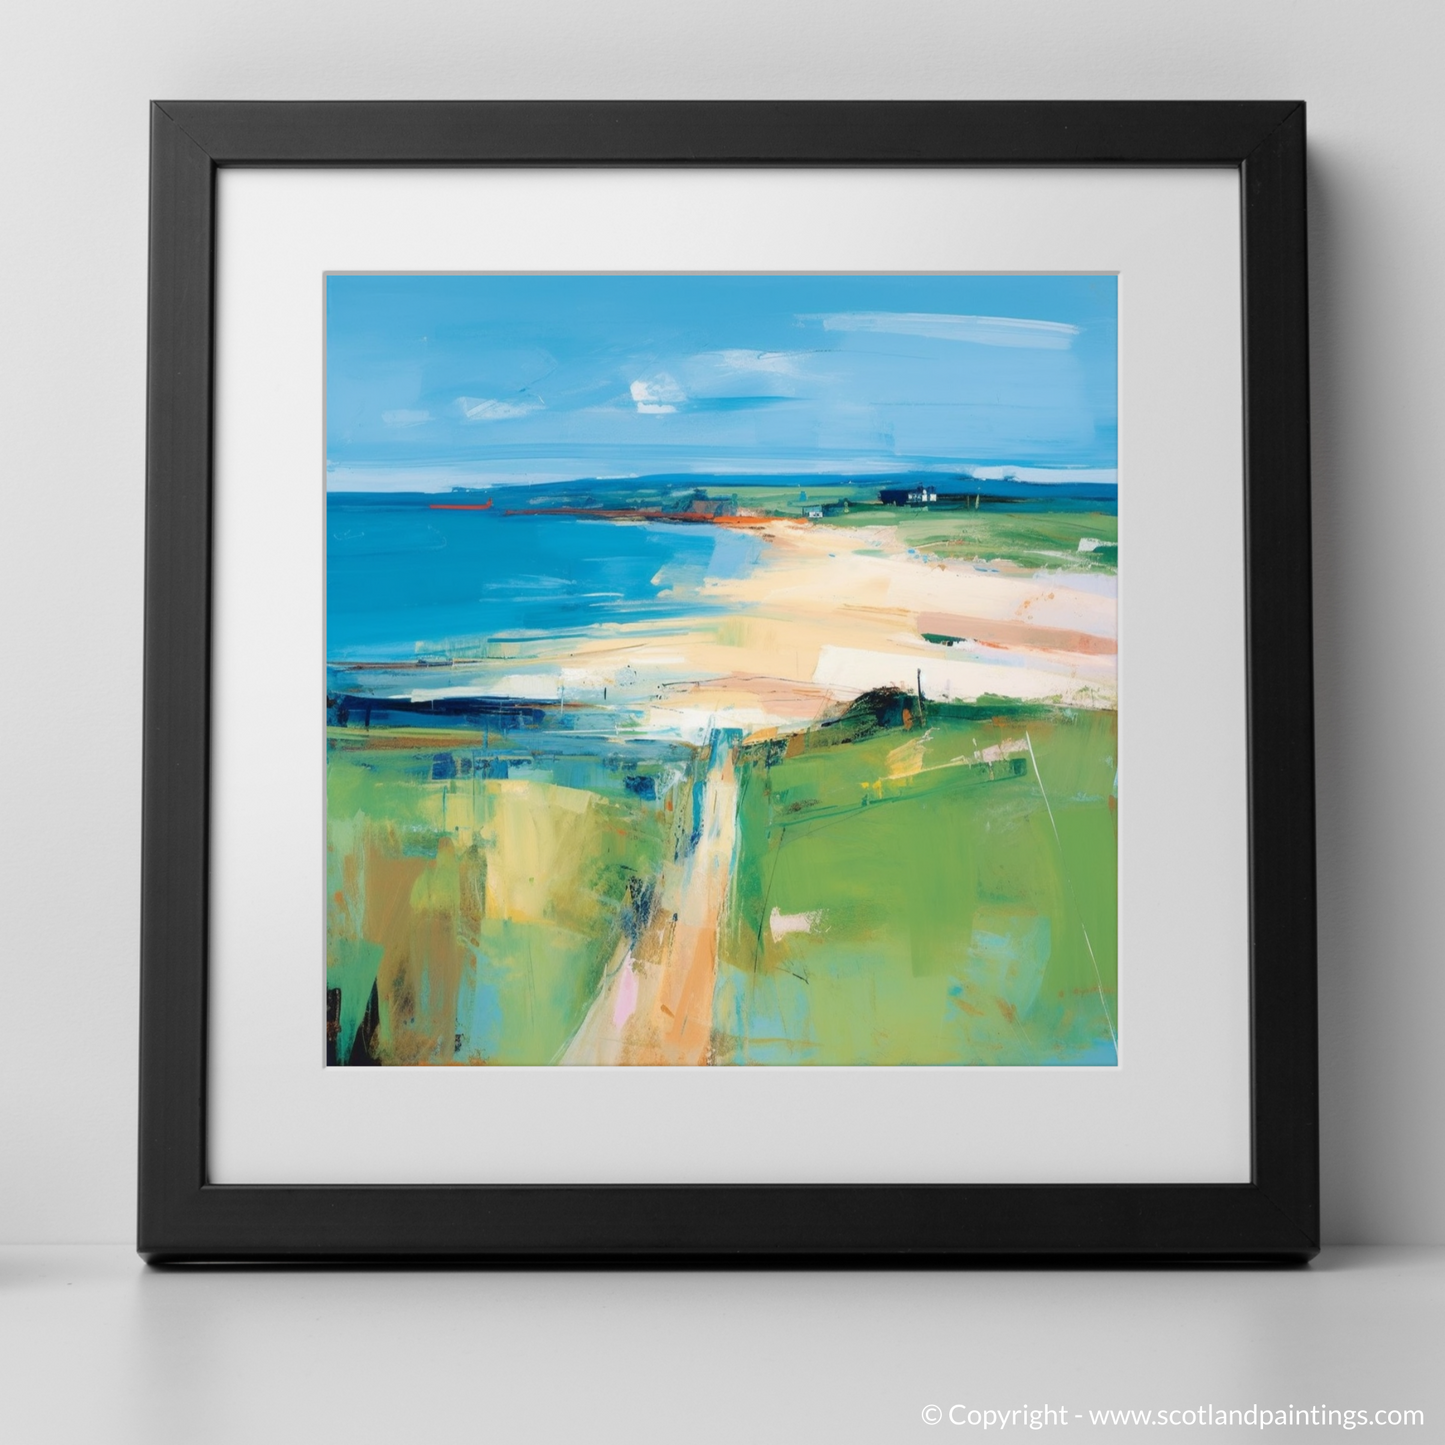 Dancing Waves and Vibrant Shores: An Abstract Impression of Gullane Beach